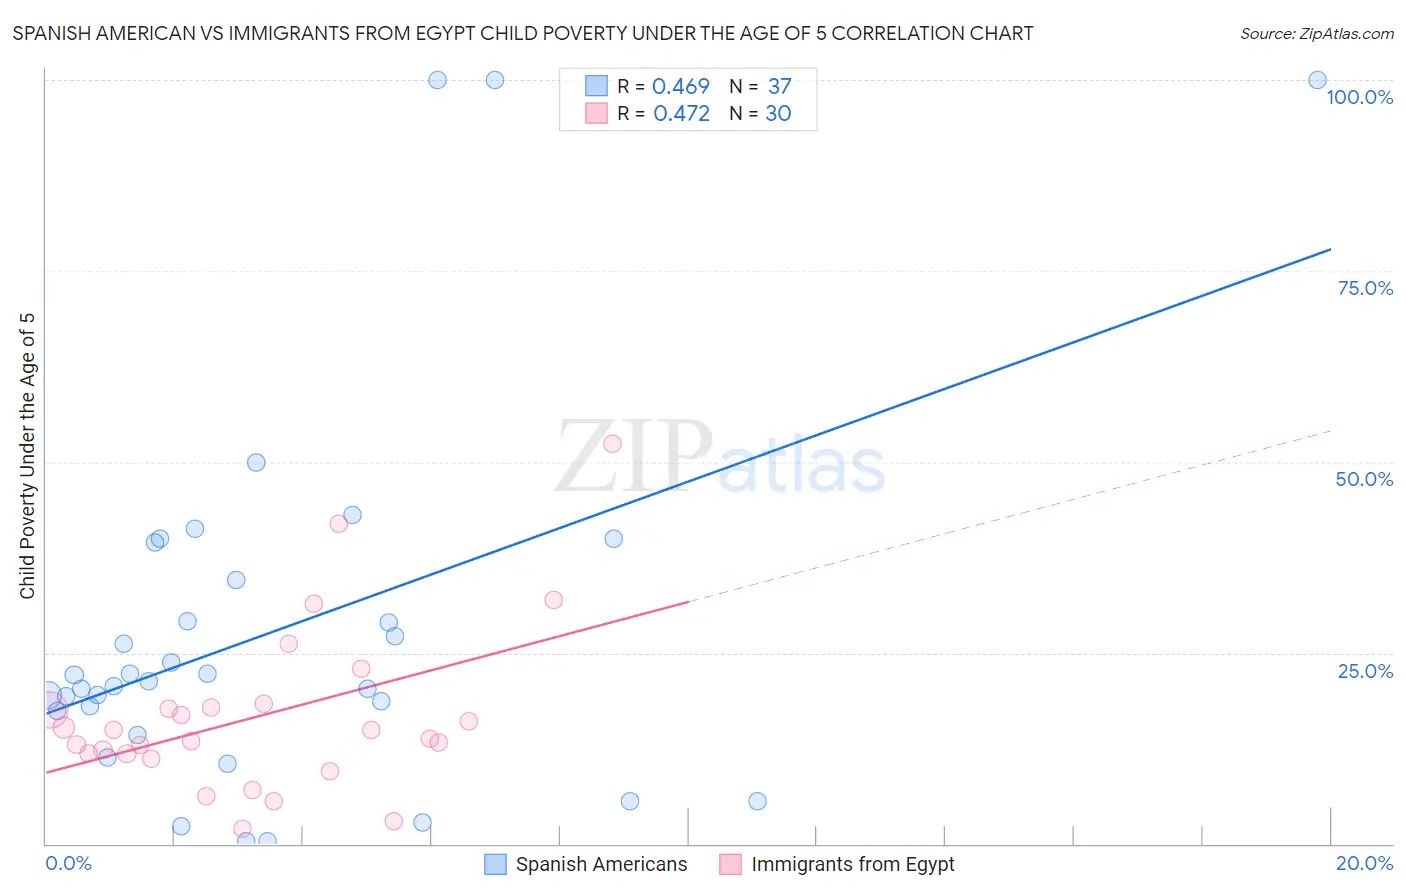 Spanish American vs Immigrants from Egypt Child Poverty Under the Age of 5